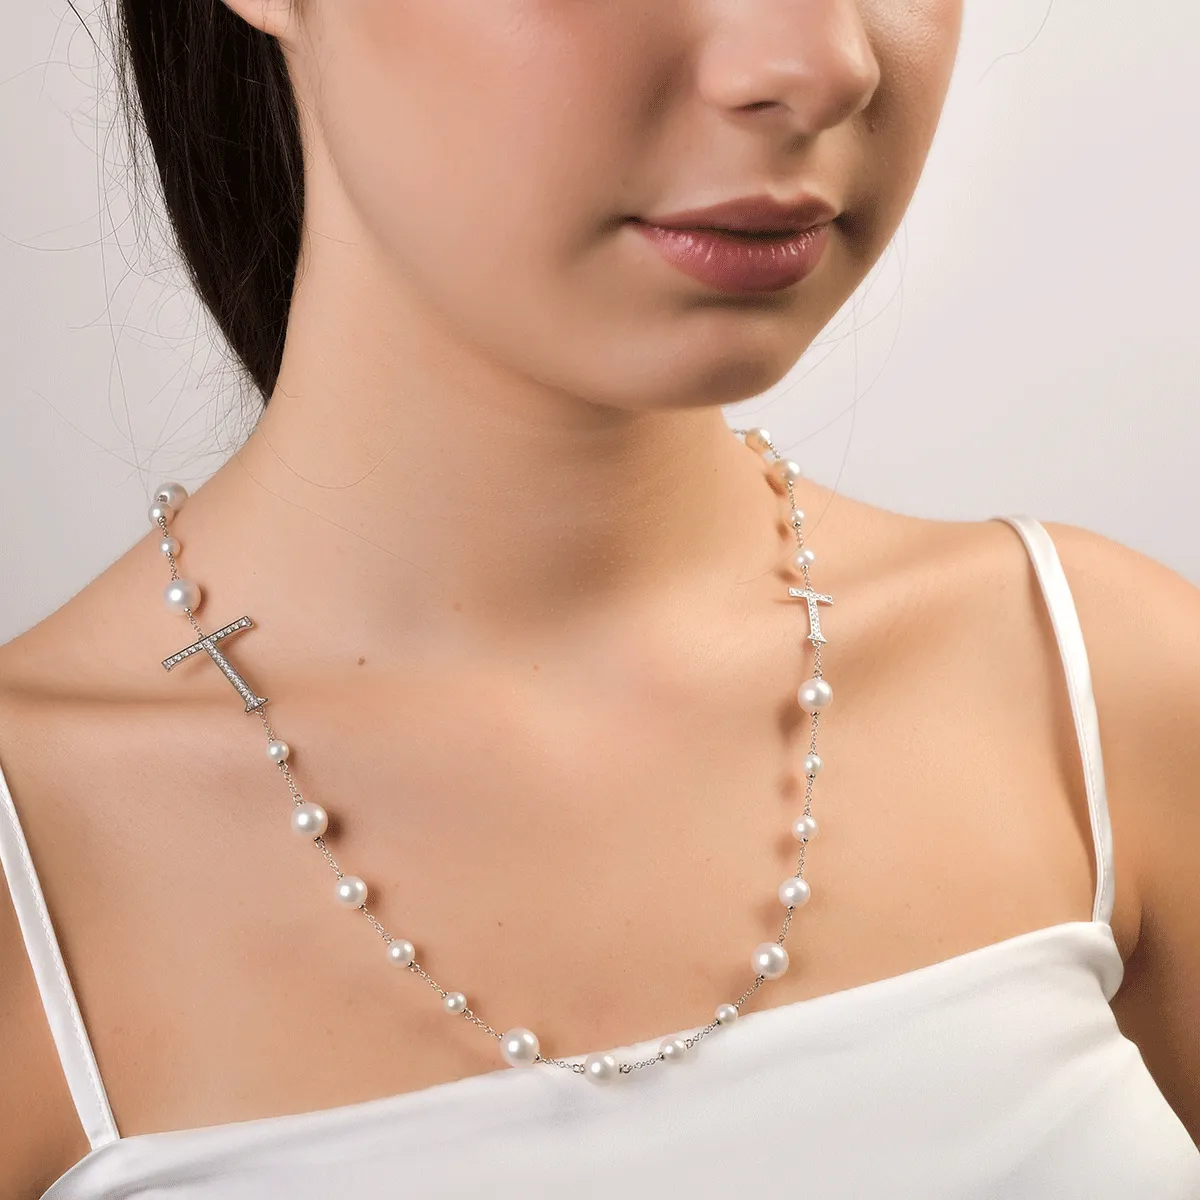 18K white gold necklace with 64.41ct fresh water pearls and 0.13ct diamonds